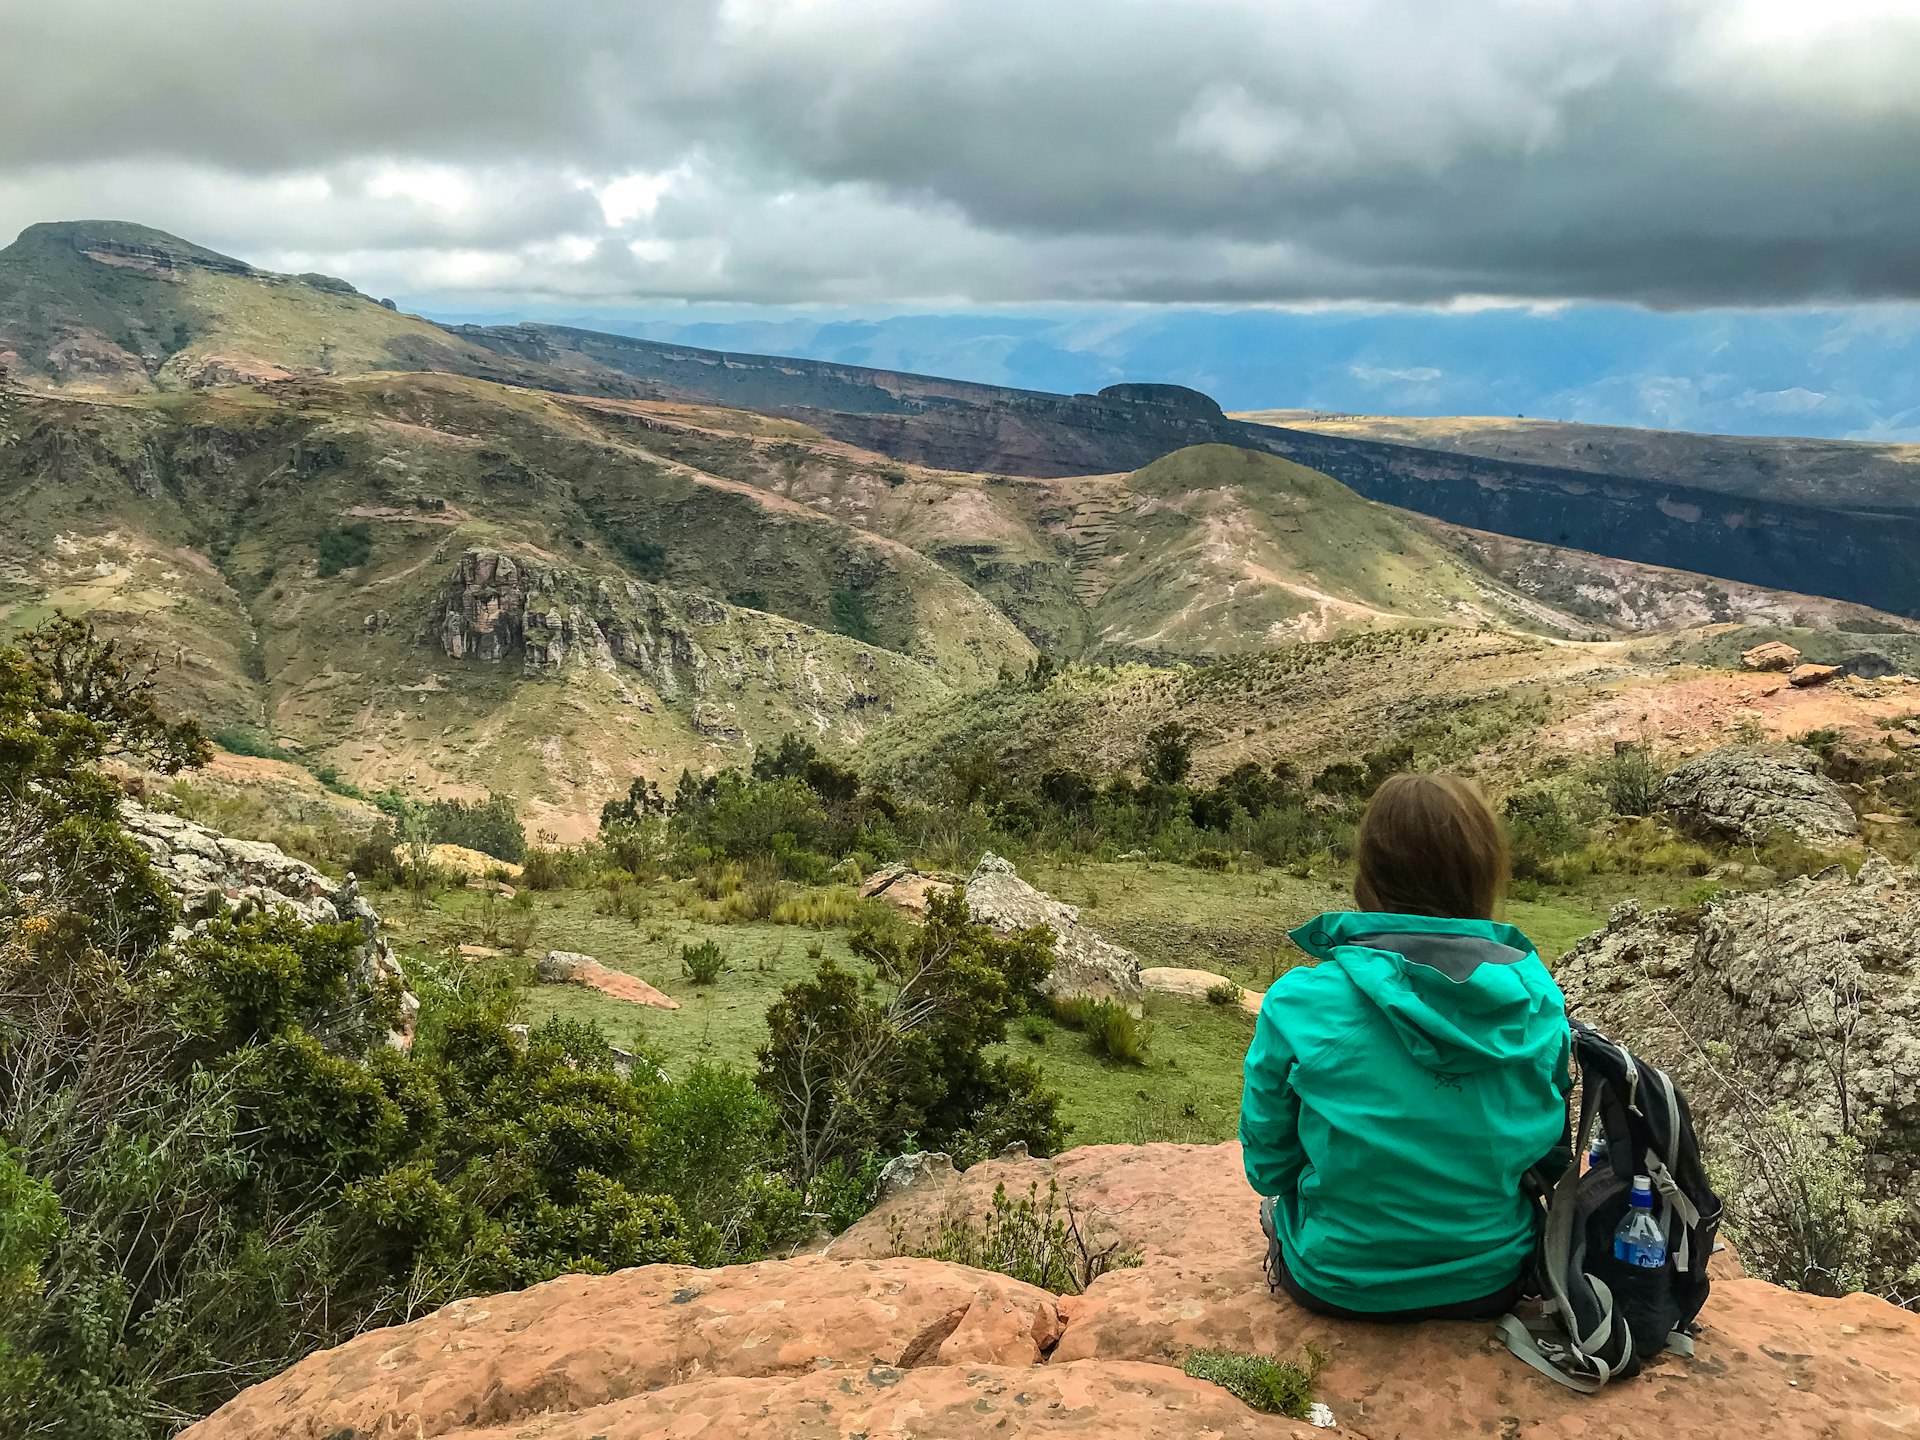 Woman with a green raincoat shot from behind, sitting at the edge of a rock point looking at the landscape at Torotoro National Park, Potosí, Bolivia